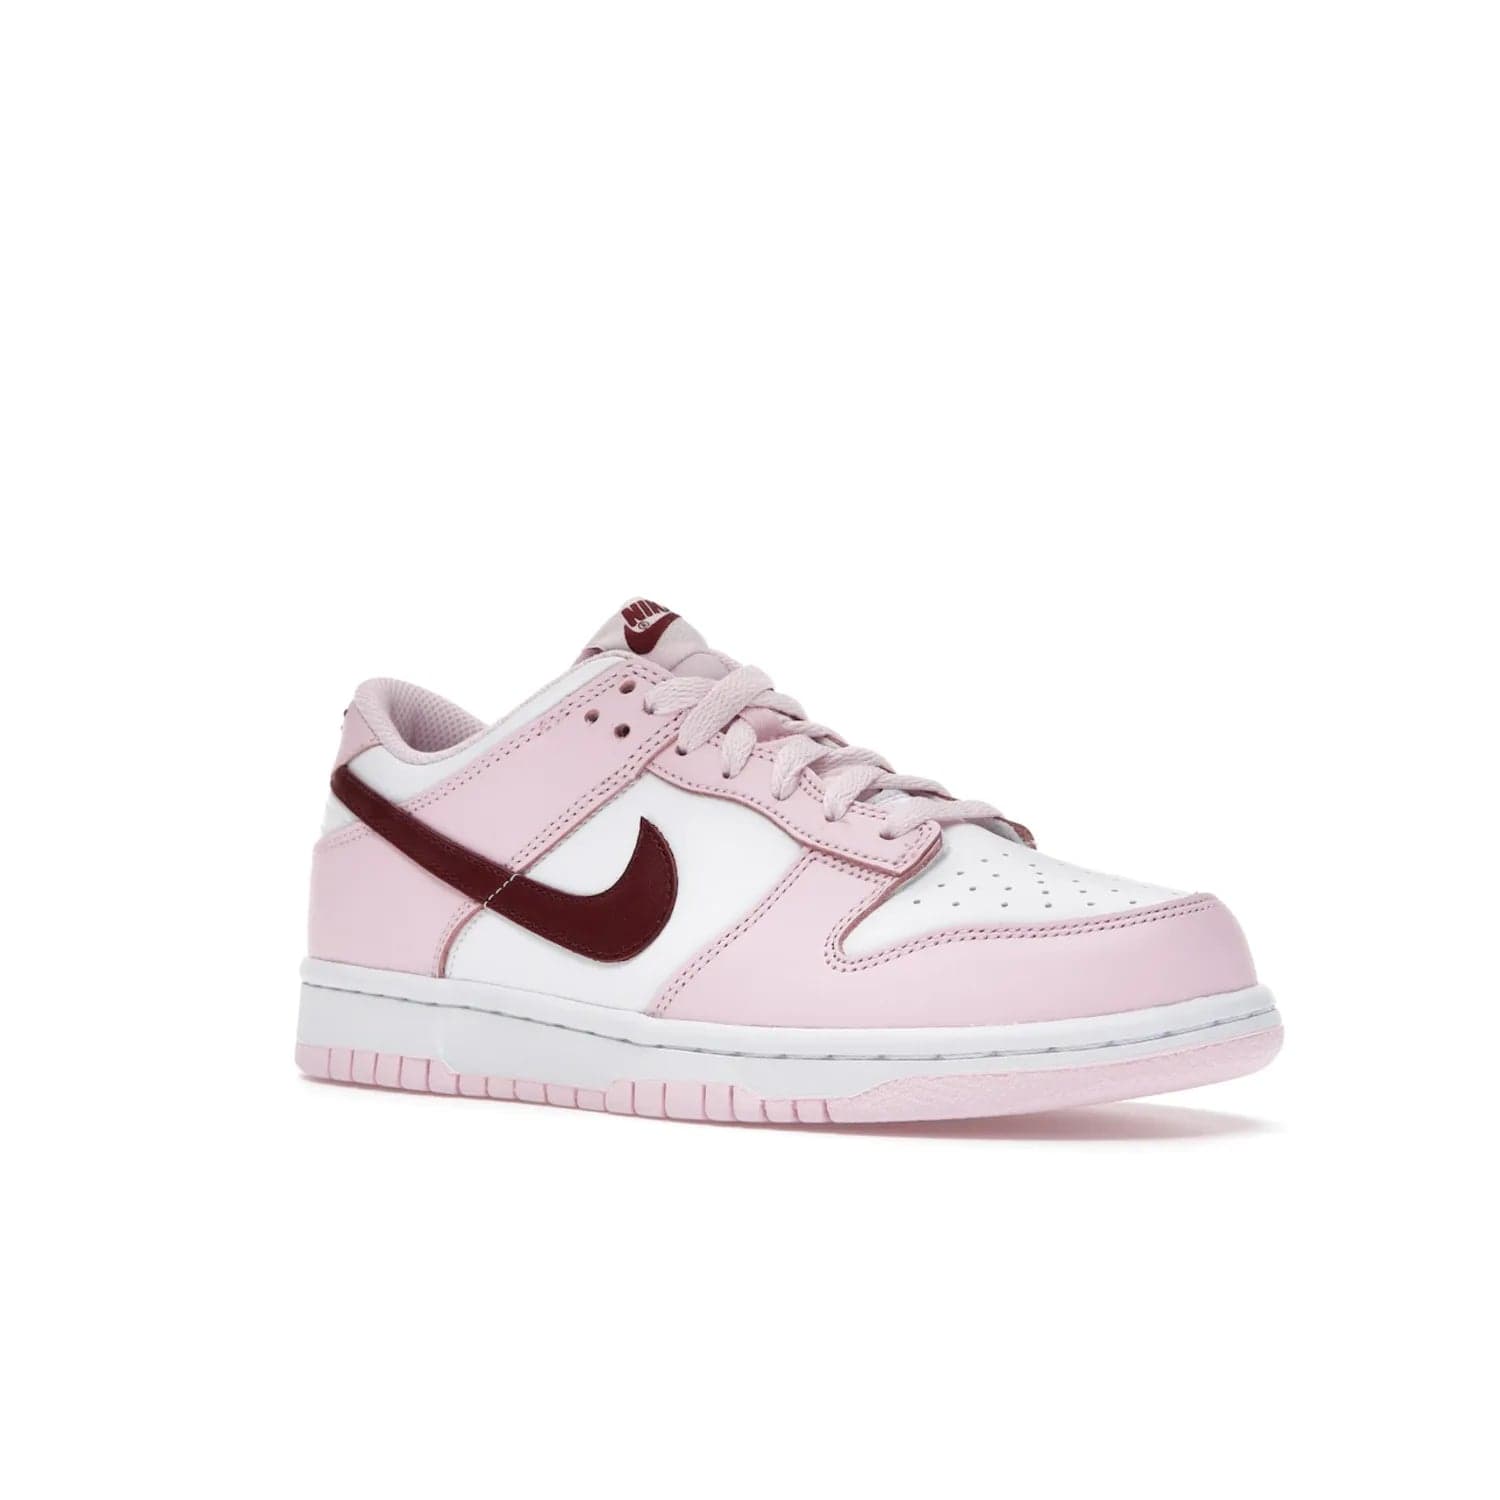 Nike Dunk Low Pink Foam Red White (GS) - Image 5 - Only at www.BallersClubKickz.com - #
Introducing the daring and stylish Nike Dunk Low Pink Foam Red White (GS) sneaker for grade schoolers. White leather with pink overlays and Dark Beetroot accents, classic Nike Dunk midsole and pink outsole. Released August 2021 for $85.